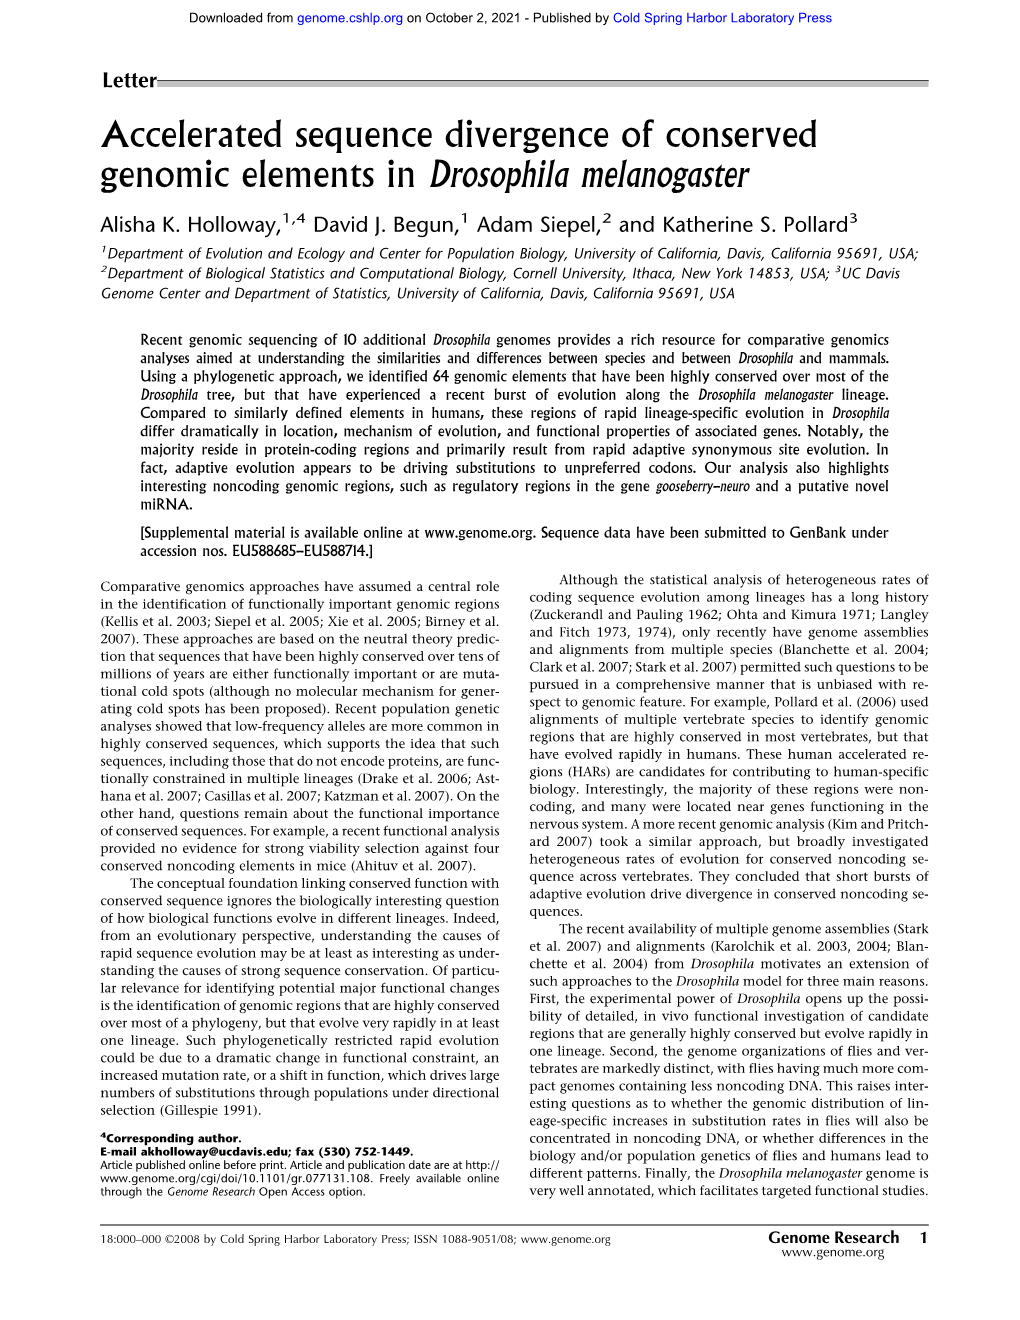 Accelerated Sequence Divergence of Conserved Genomic Elements in Drosophila Melanogaster